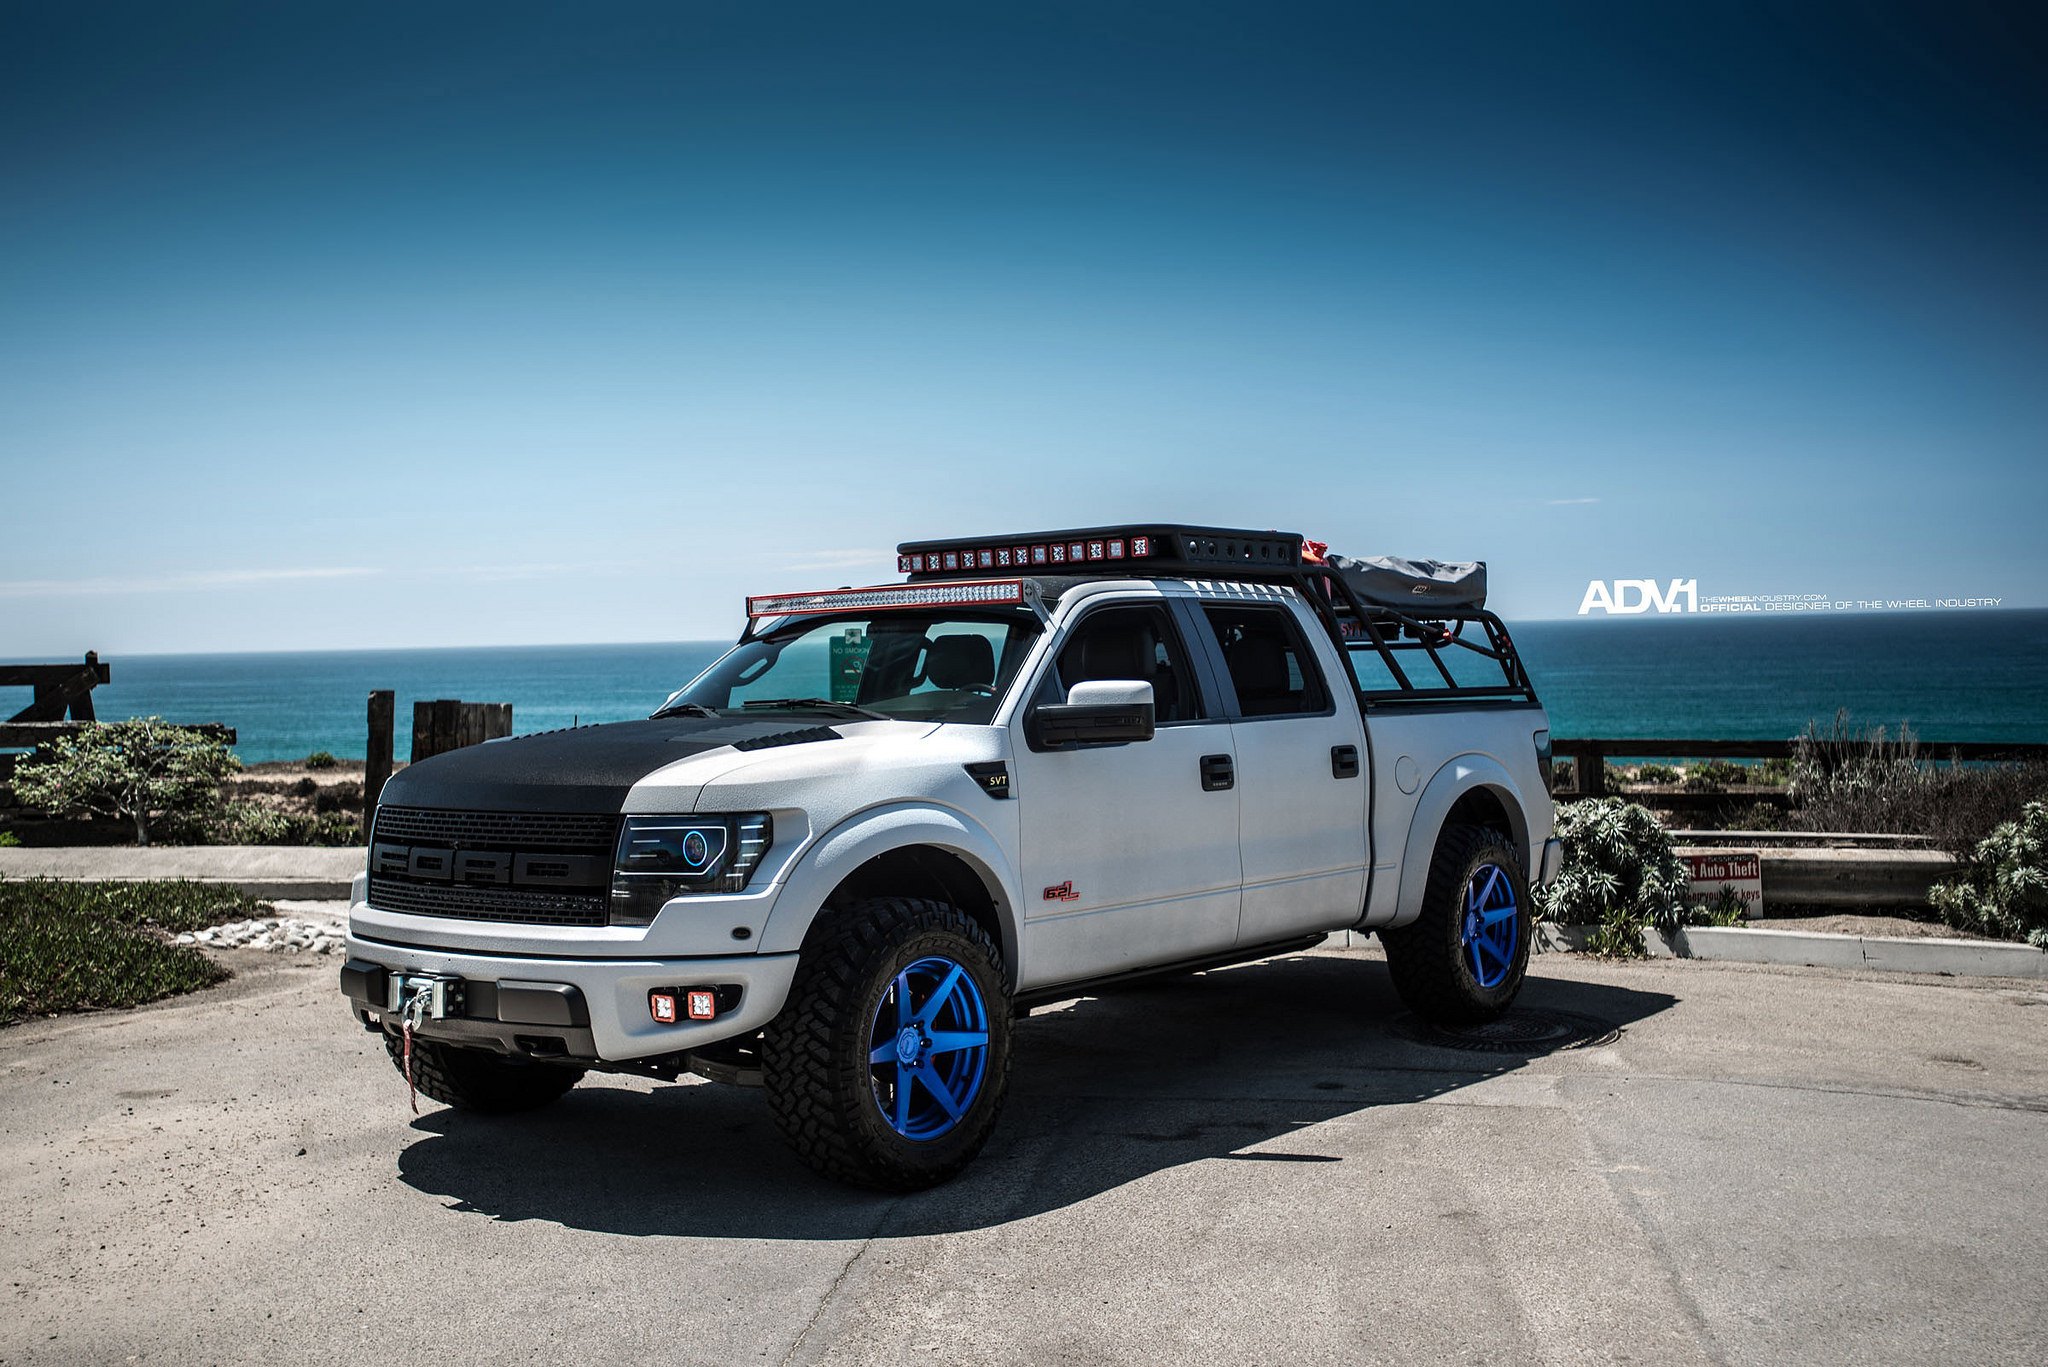 F150 Raptor With Protective Body Coating - Photo by ADV.1